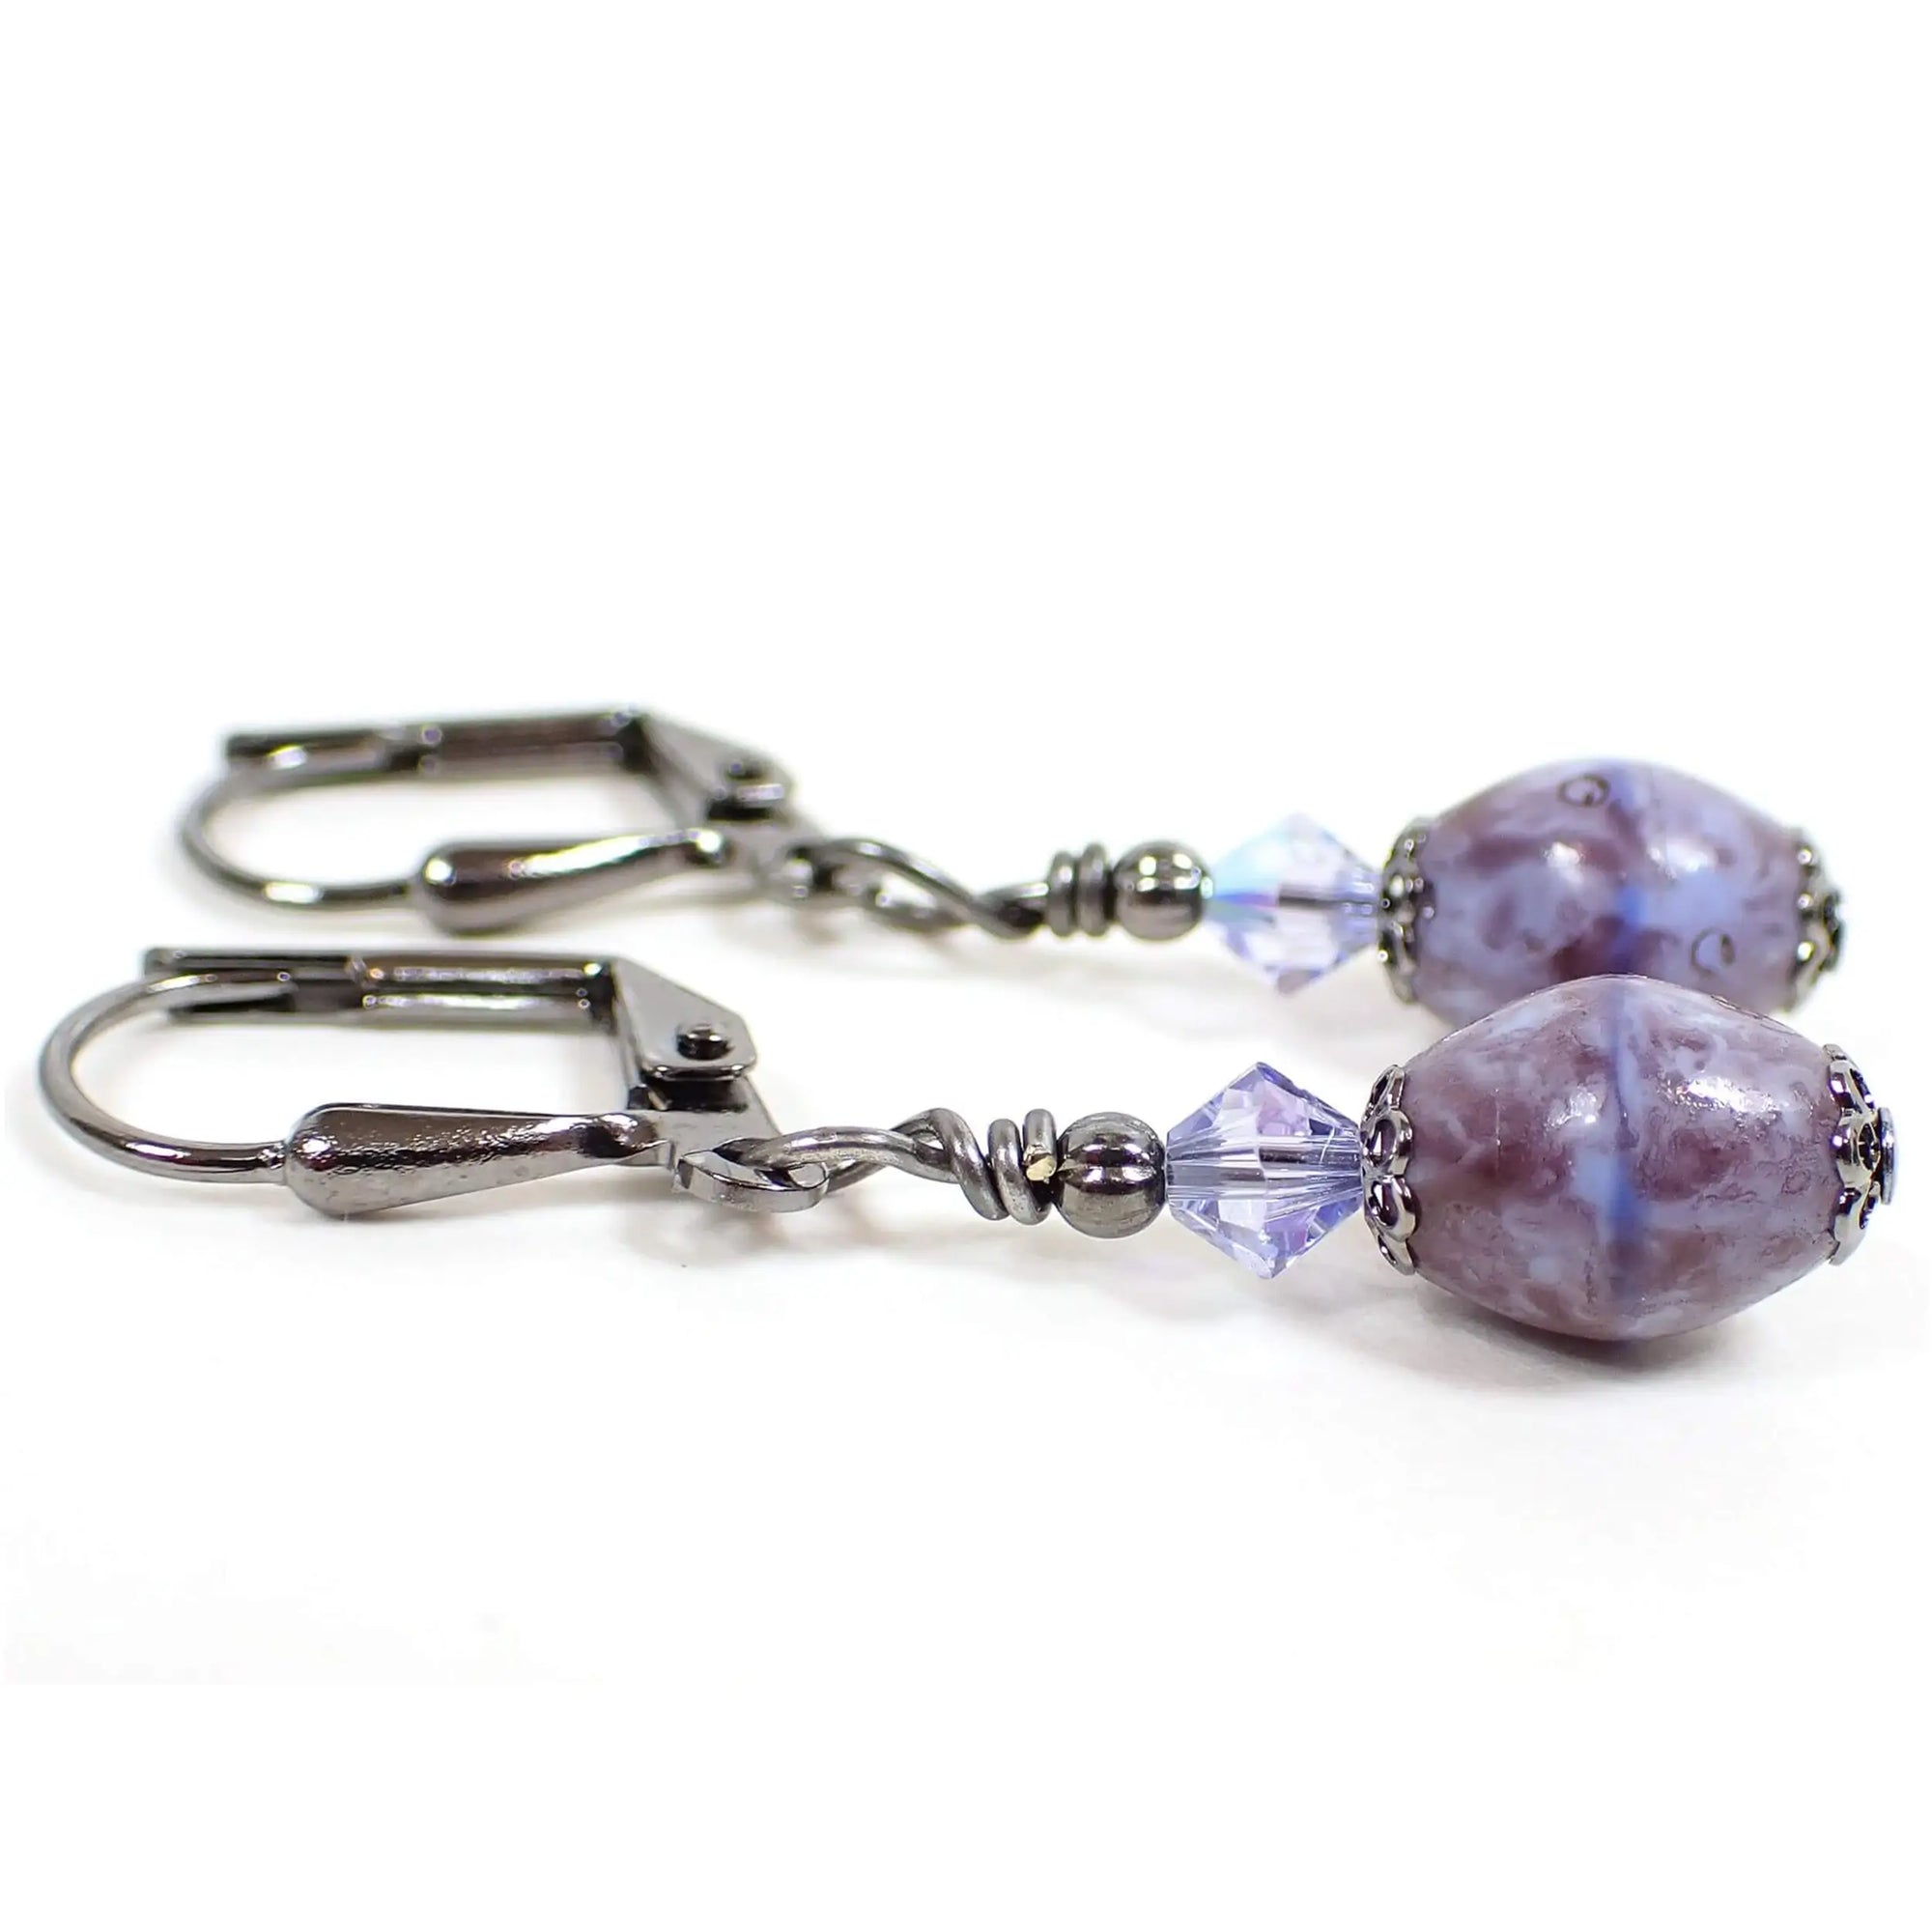 Side view of the handmade drop earrings with Czech beads. The metal is gunmetal gray in color. There are small faceted glass crystal beads at the top in a light purple color. The bottom Czech beads are glass, oval shaped, and have a mottled design with shades of purple on them.